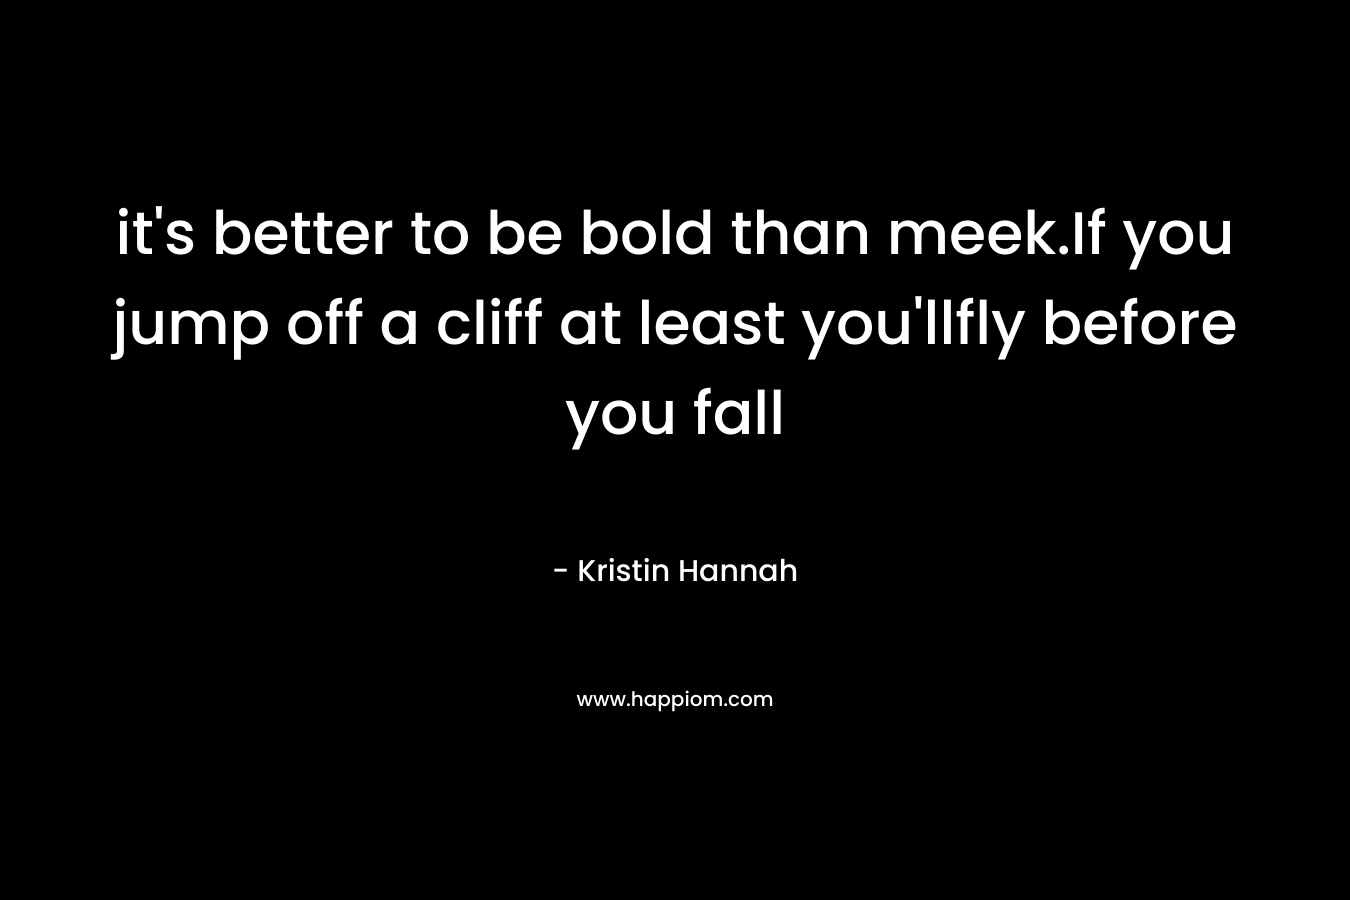 it’s better to be bold than meek.If you jump off a cliff at least you’llfly before you fall – Kristin Hannah